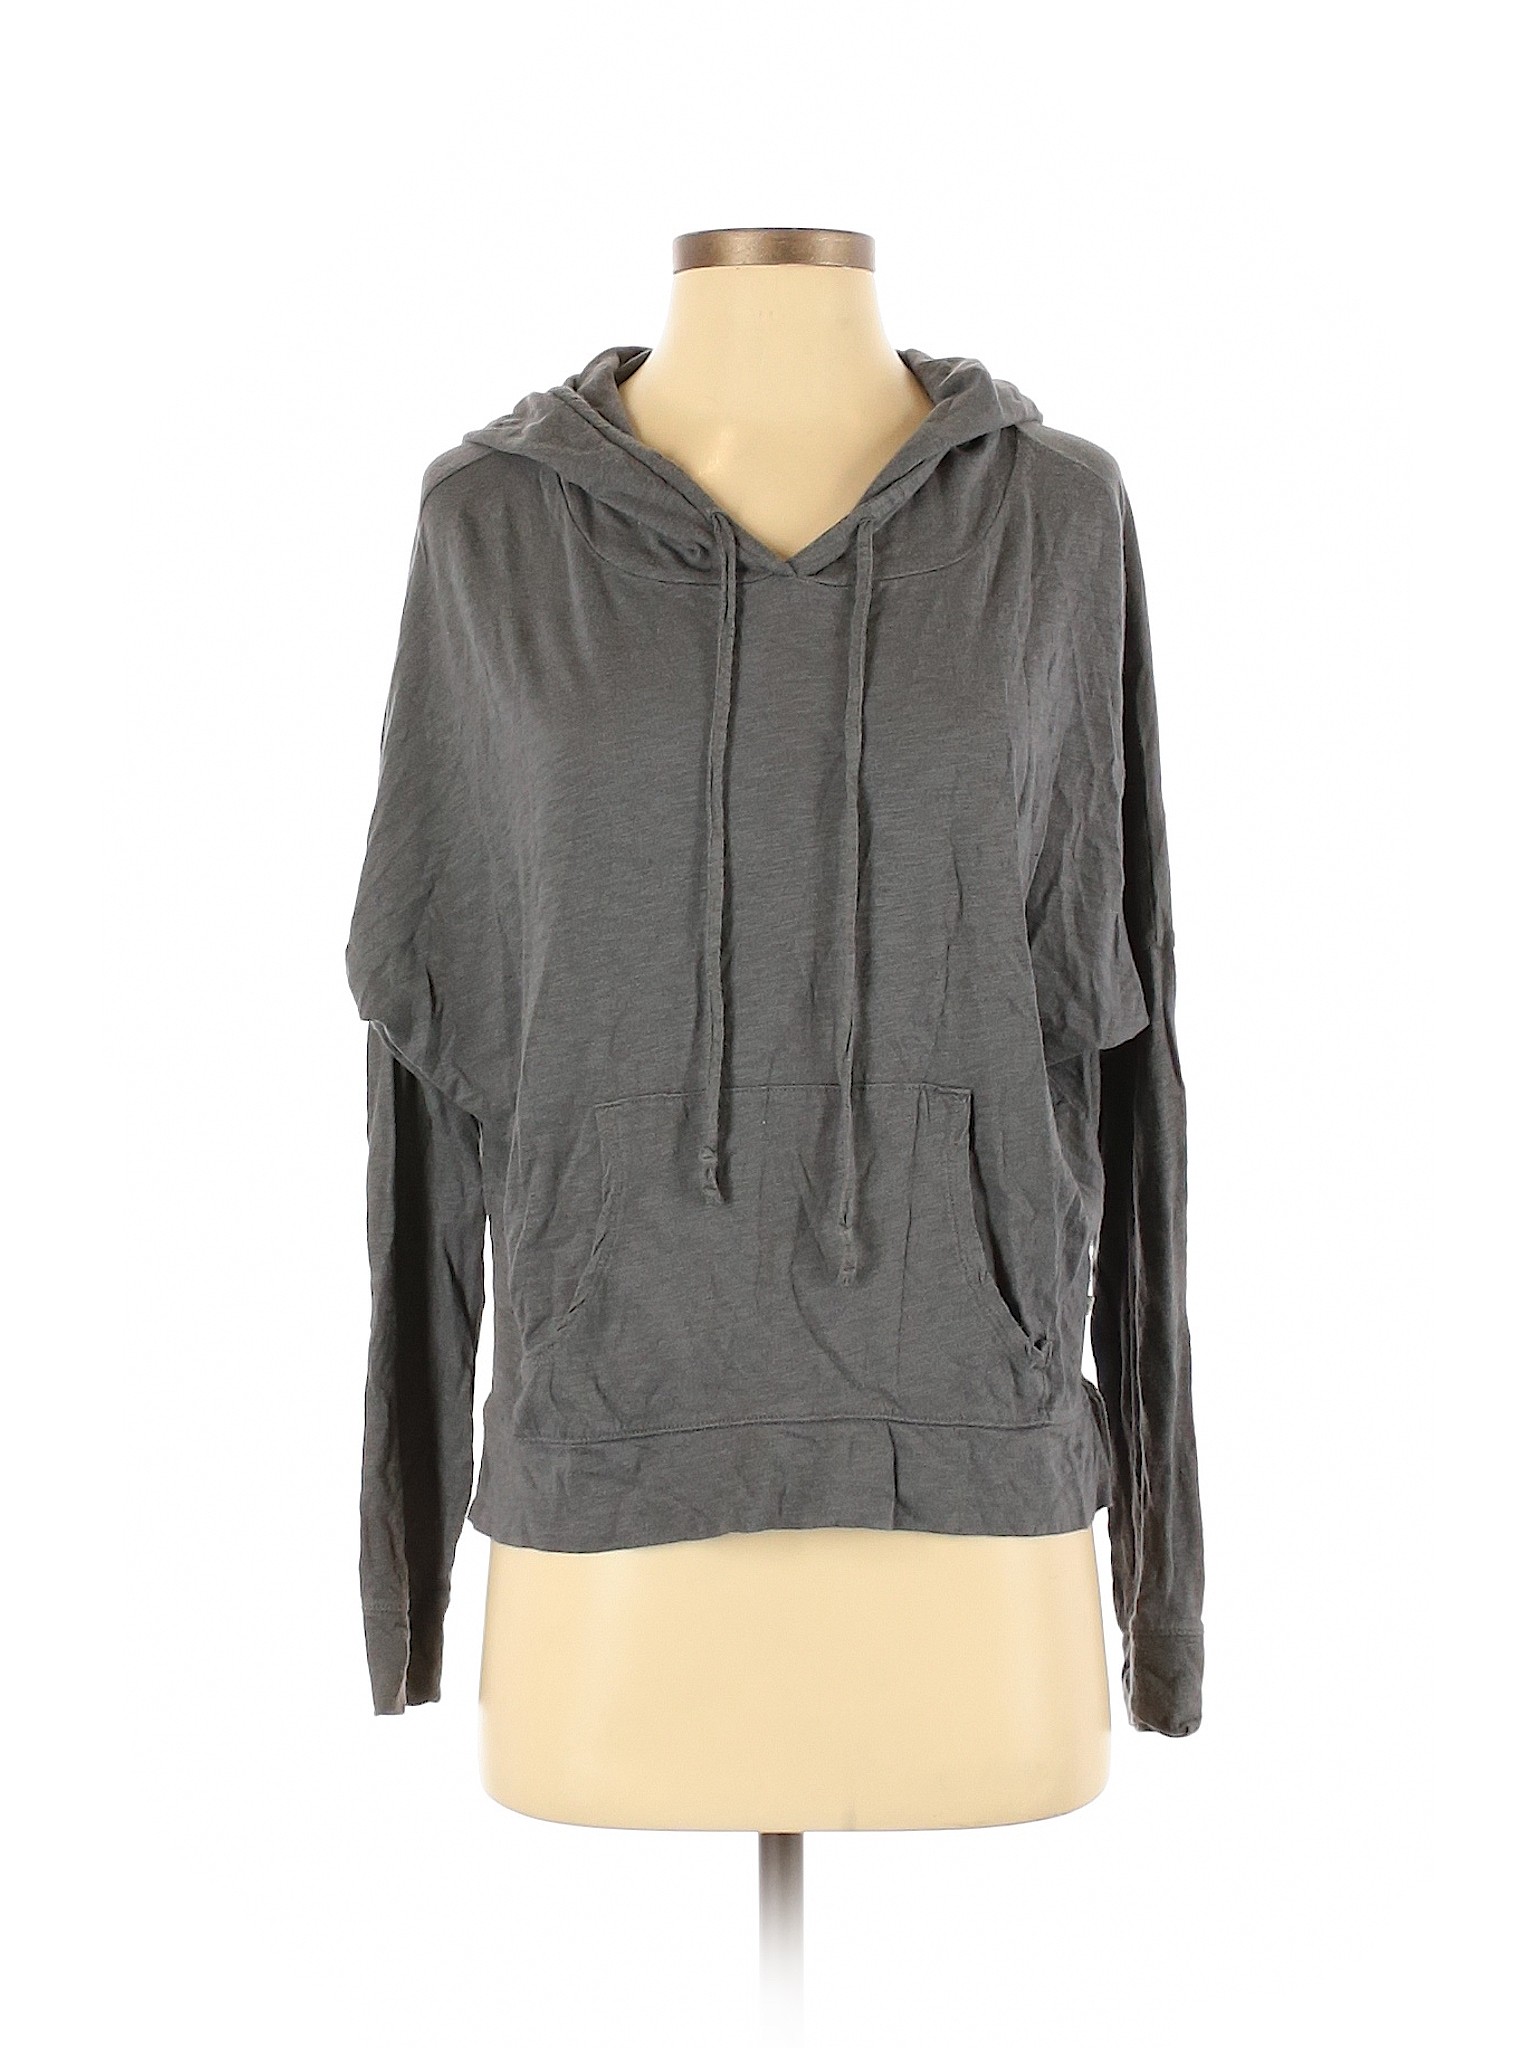 Abercrombie & Fitch Women Gray Pullover Hoodie S | eBay